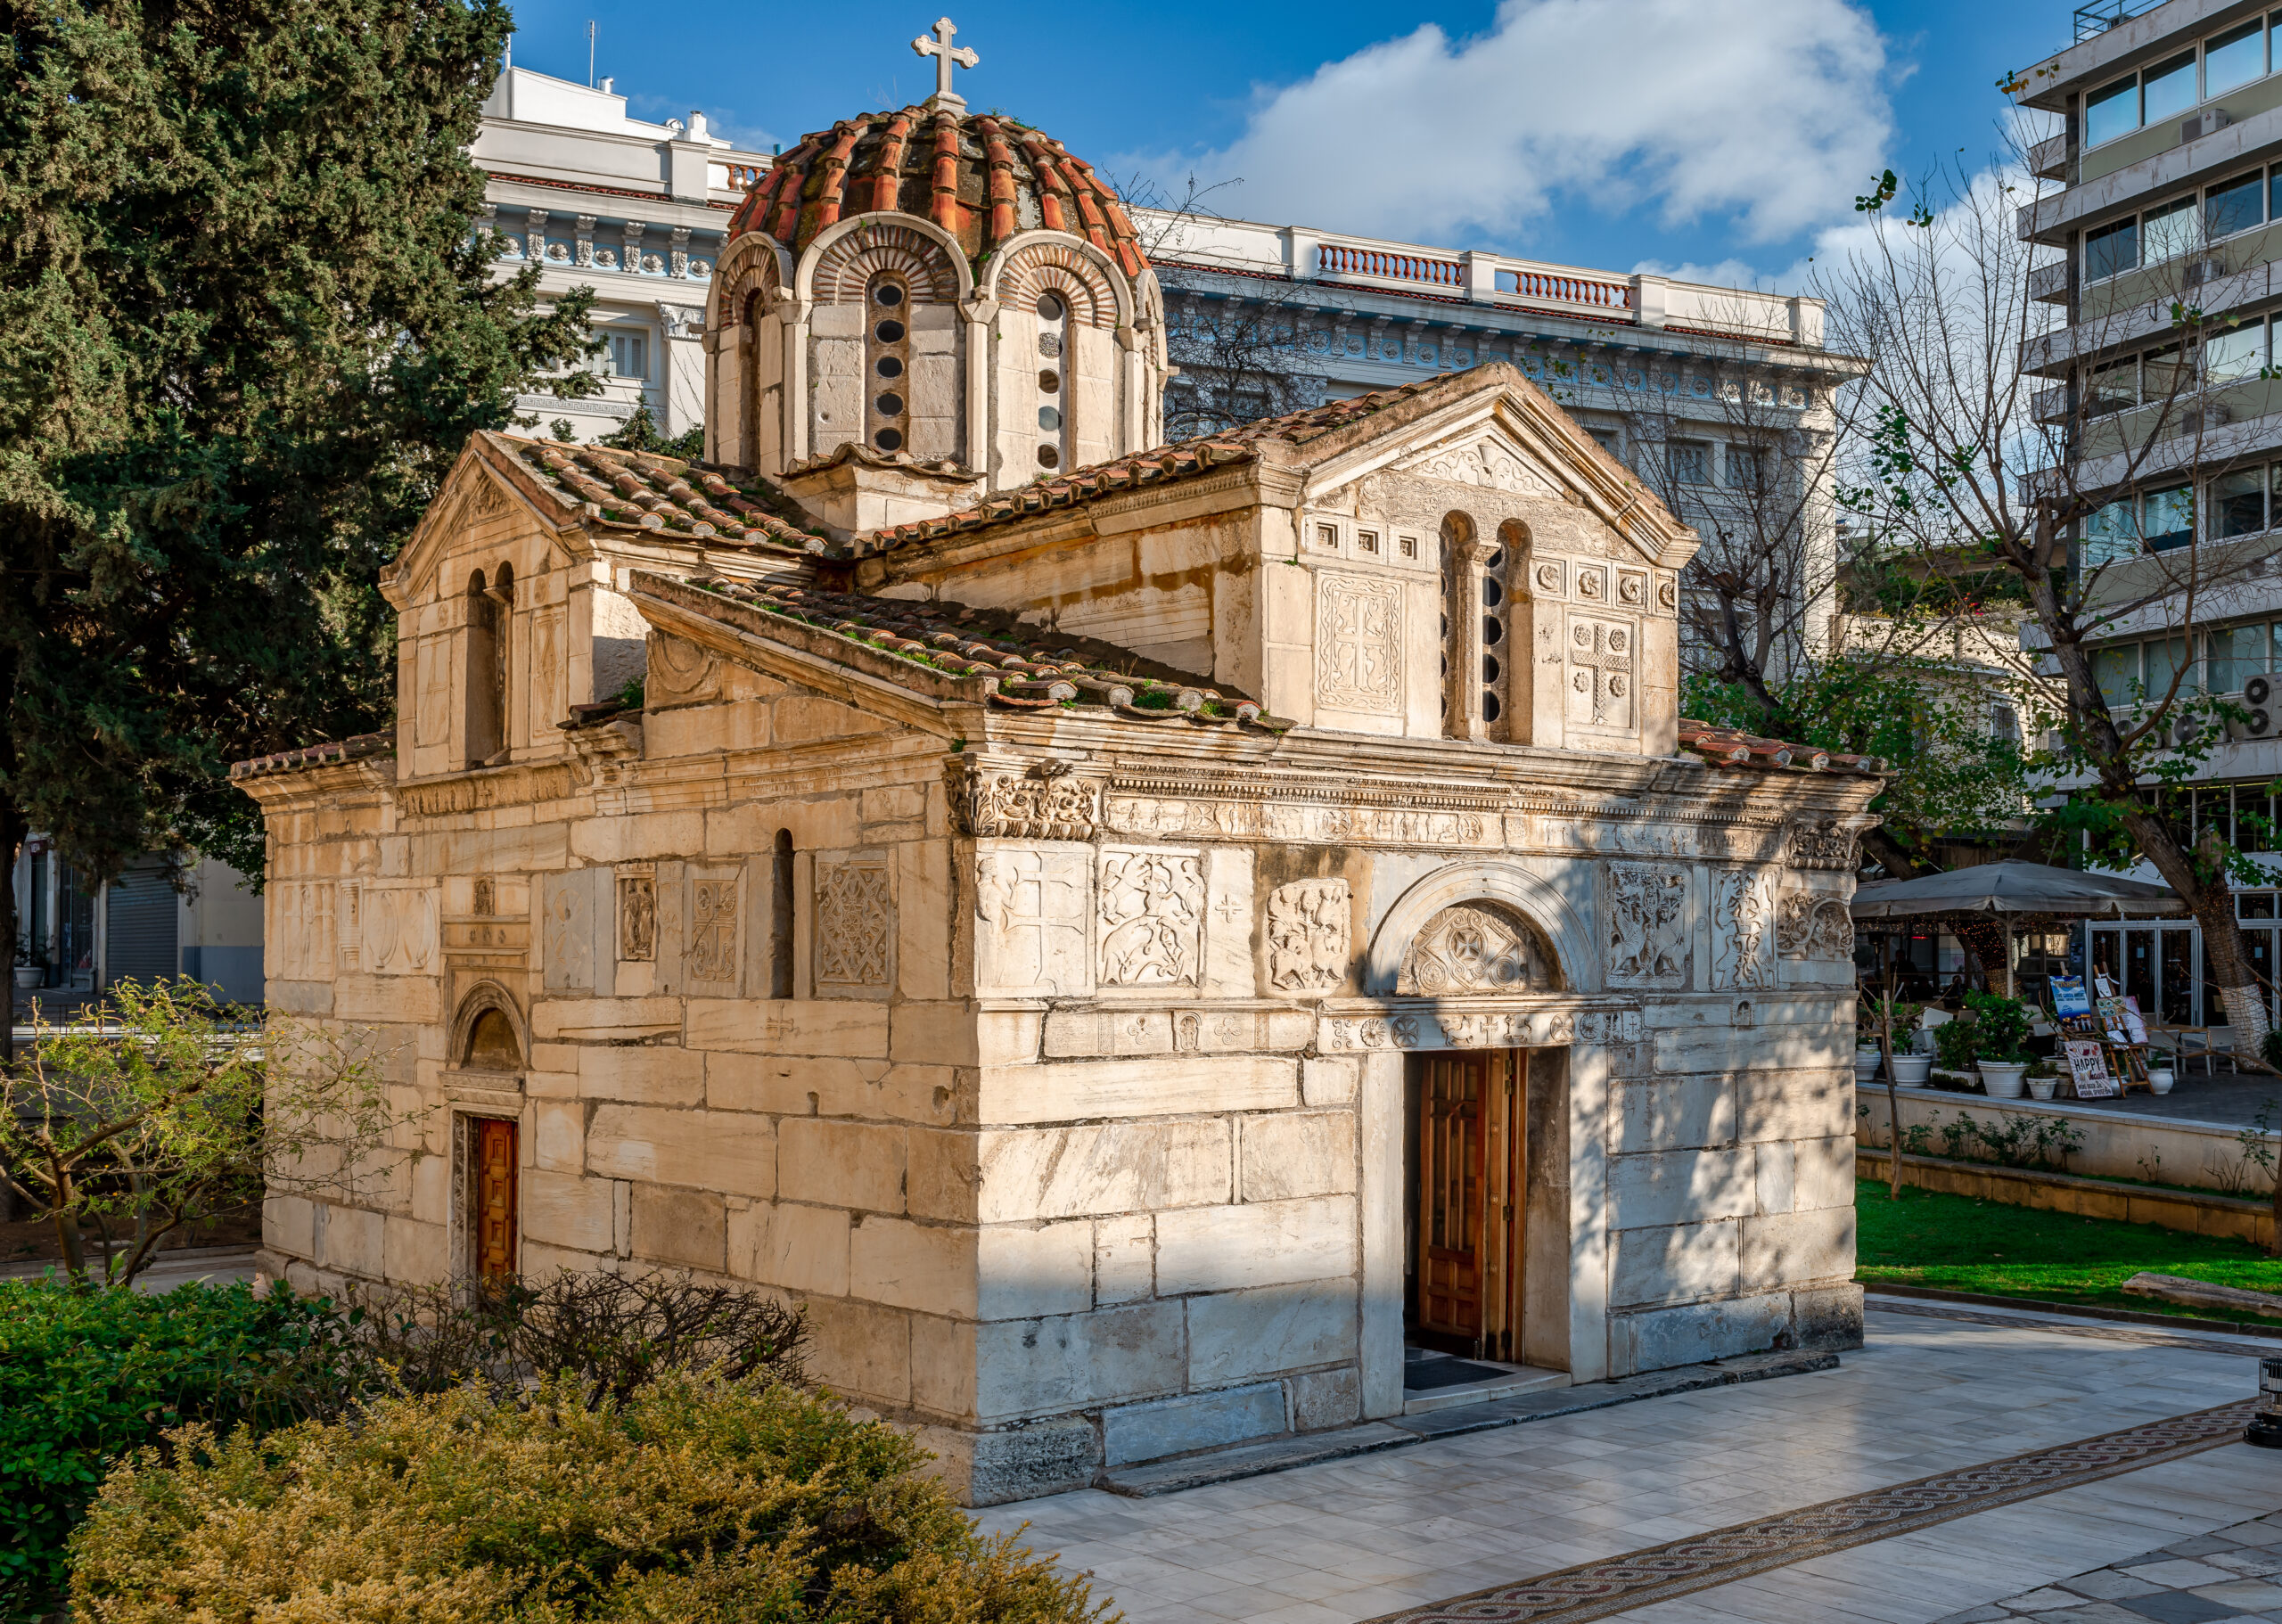 Athens’ “Little Cathedral” and its unique building materials